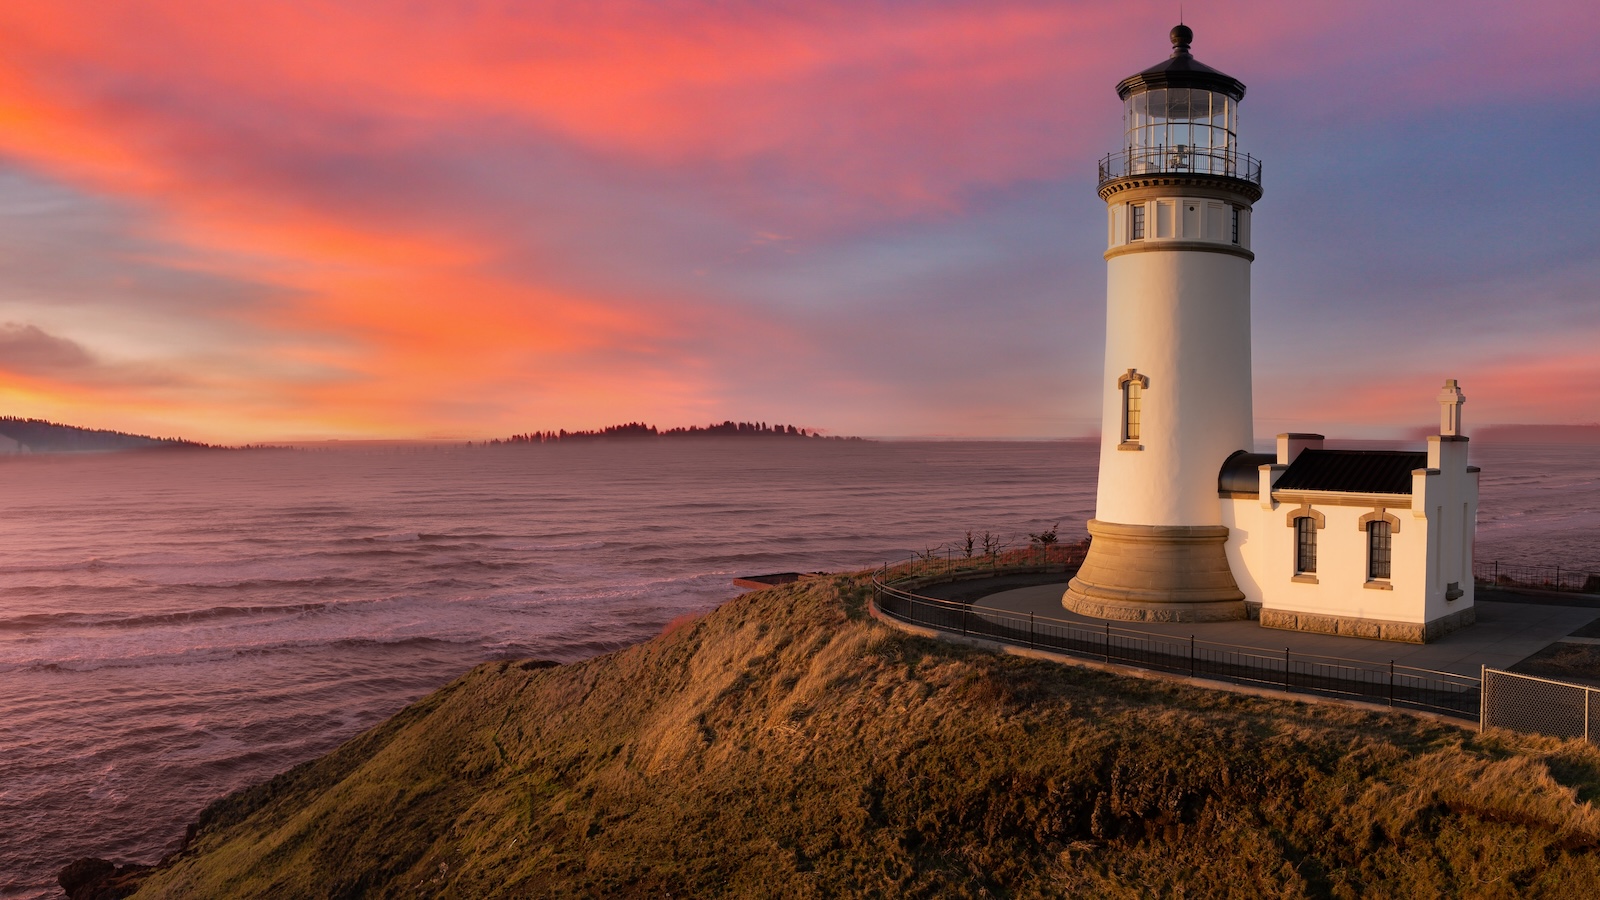 <p>Washington State is home to rugged coastal landscapes that have vexed mariners for centuries. With fierce winds, frigid waters, and quickly changing conditions that can turn a sunny day into a life-or-death situation, the need for navigational aids is an absolute necessity.</p> <p>For centuries, lighthouses were the main way to aid ships to the inner coastal waters or around treacherous rocks. These buildings could be seen sometimes up to 20 miles offshore and were a beacon for mariners after making a long trip up the West Coast or across the Pacific.</p> <p>While some of the lighthouses in Washington remain operational today, many have been decommissioned. They are now tourist destinations for folks who want a glimpse into how life may have looked 100+ years ago along the coast.</p> <p>Let’s take a trip through the lighthouses of Washington as they range from remote outposts to cozy buildings just miles from bustling downtown Seattle.</p>